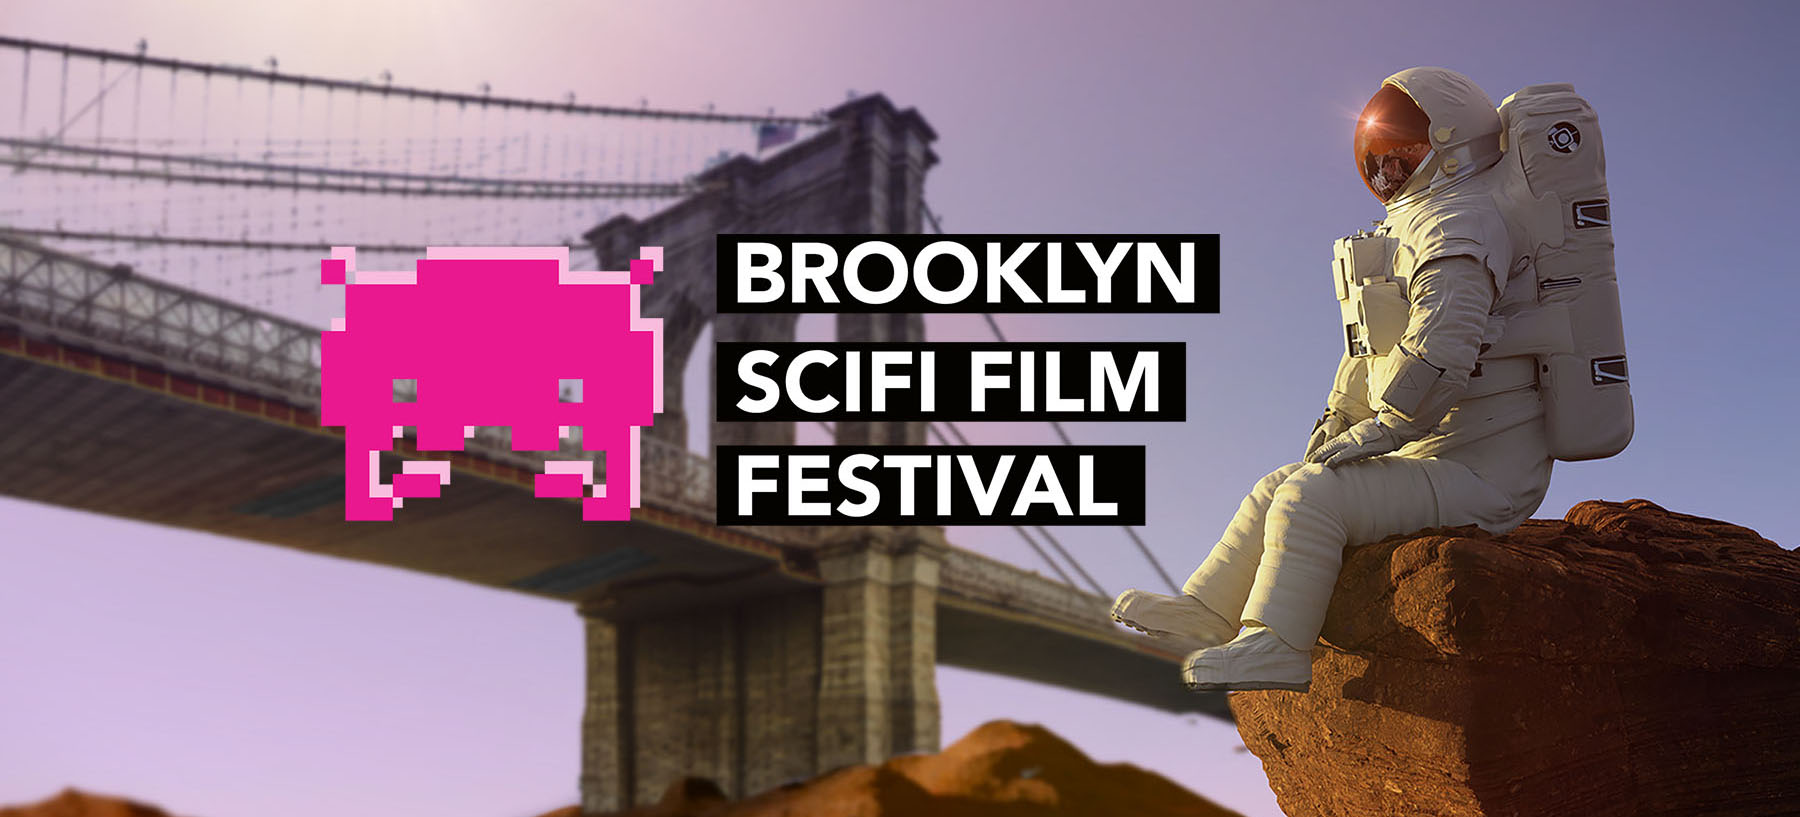 The Brooklyn SciFi Film Festival returns for a second year this September, 2021